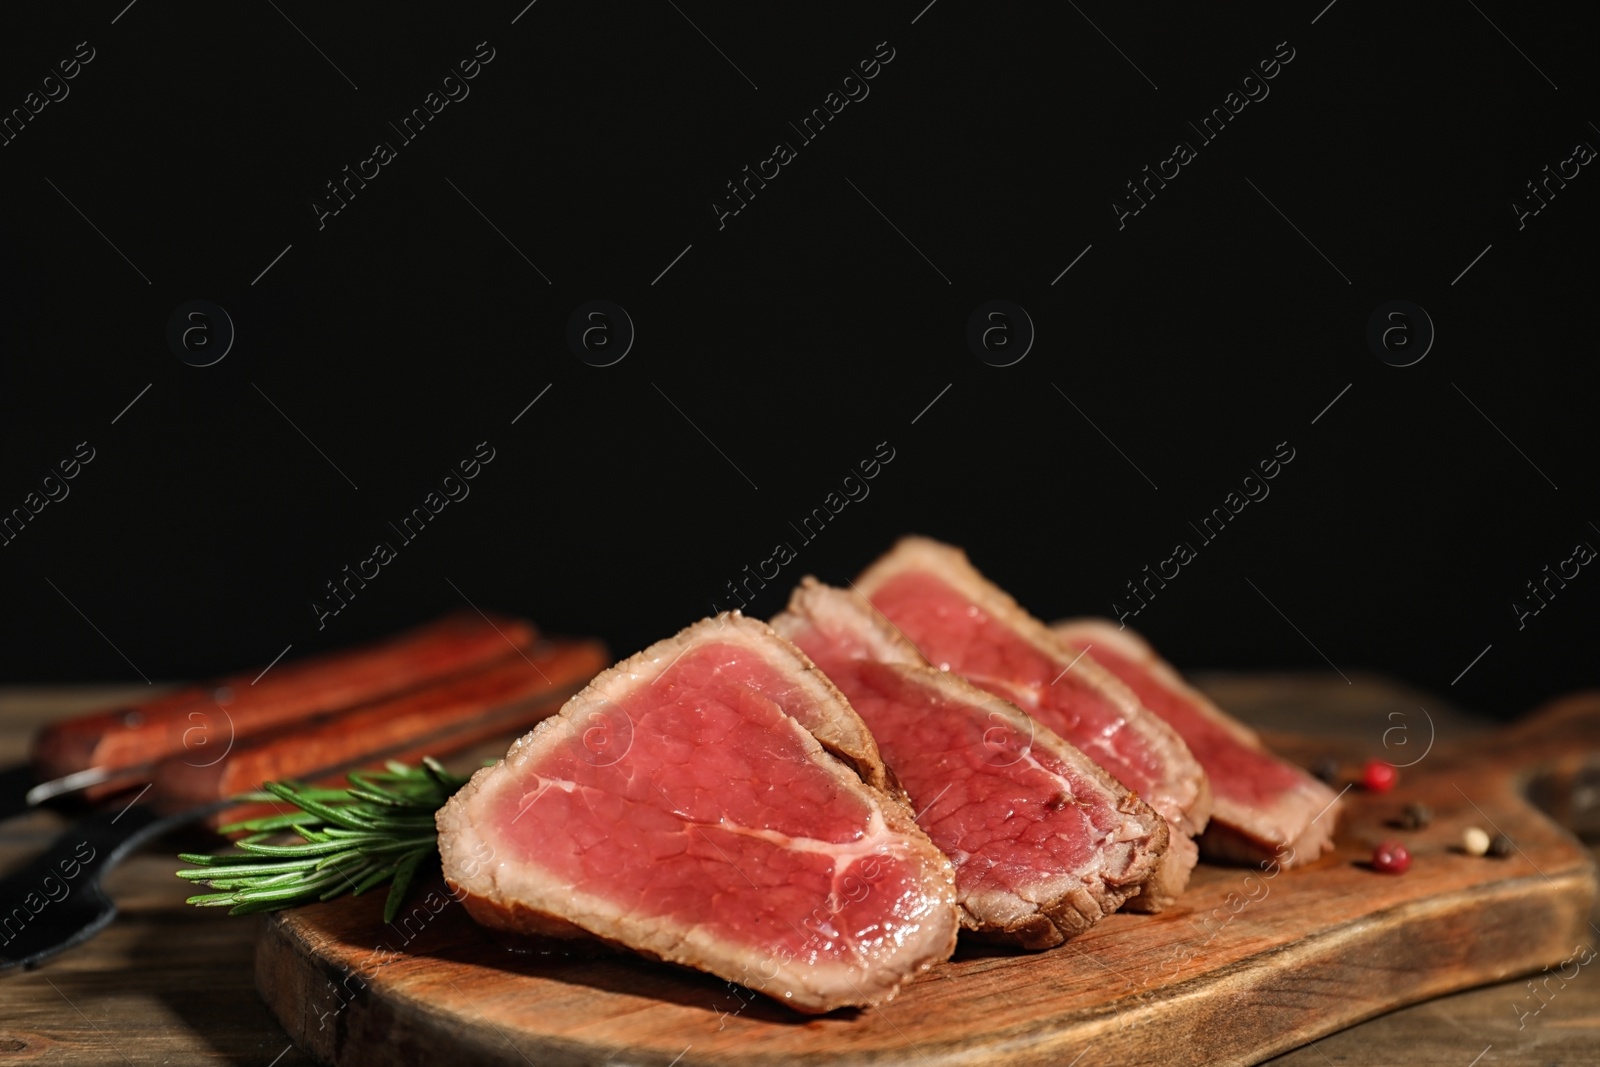 Photo of Board with roasted meat and rosemary on wooden table against black background. Space for text